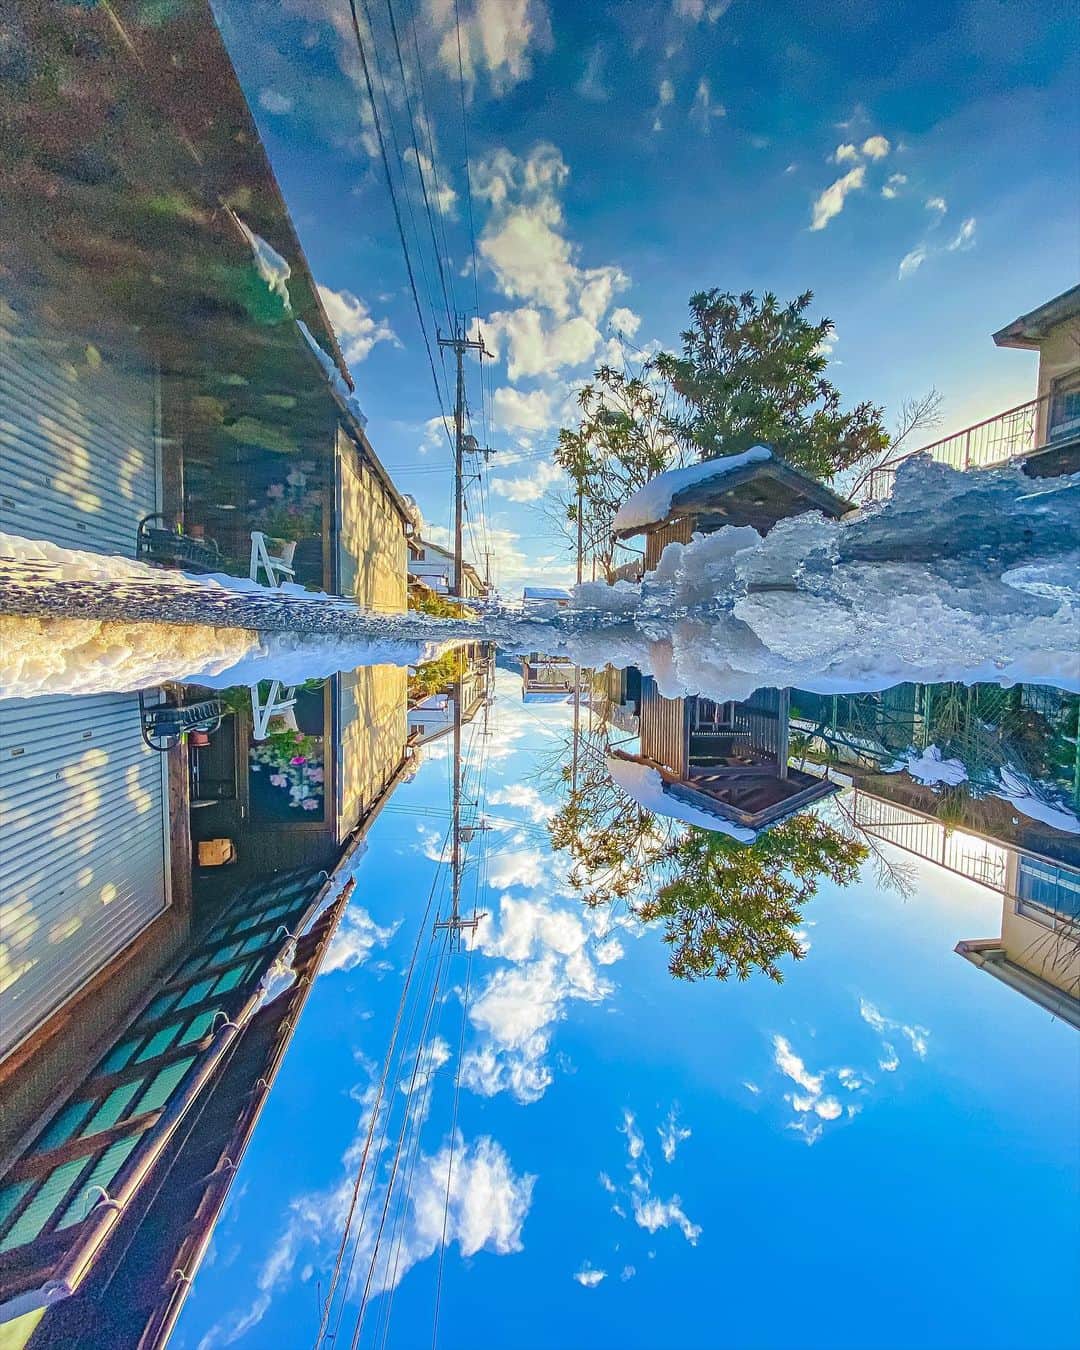 Shotaのインスタグラム：「反転世界  inverted world  写真集「何気ない日常をアニメチックに。」Amazon販売中です！ 気になってくださった方は、プロフィールのハイライトよりリンクをご確認いただければと思います！！  Photo book, "Animating the Uncommon Everyday." Now on sale at Amazon!  If you are interested, please check the link from the highlight in my profile!  #アニメチック  #japan #photography #photo #lightroom #blue #kf_gallery #raw_japan #japangem #photo_shorttrip  #photo_travelers  #japan_bestpic_  #japan_photogroup  #japantravelphoto  #lovers_nippon  #best_photo_japan  #photo_map  #5min_japan #look_japan  #tabispo #total_japan #thelifejapan #雲フェチクラブ」